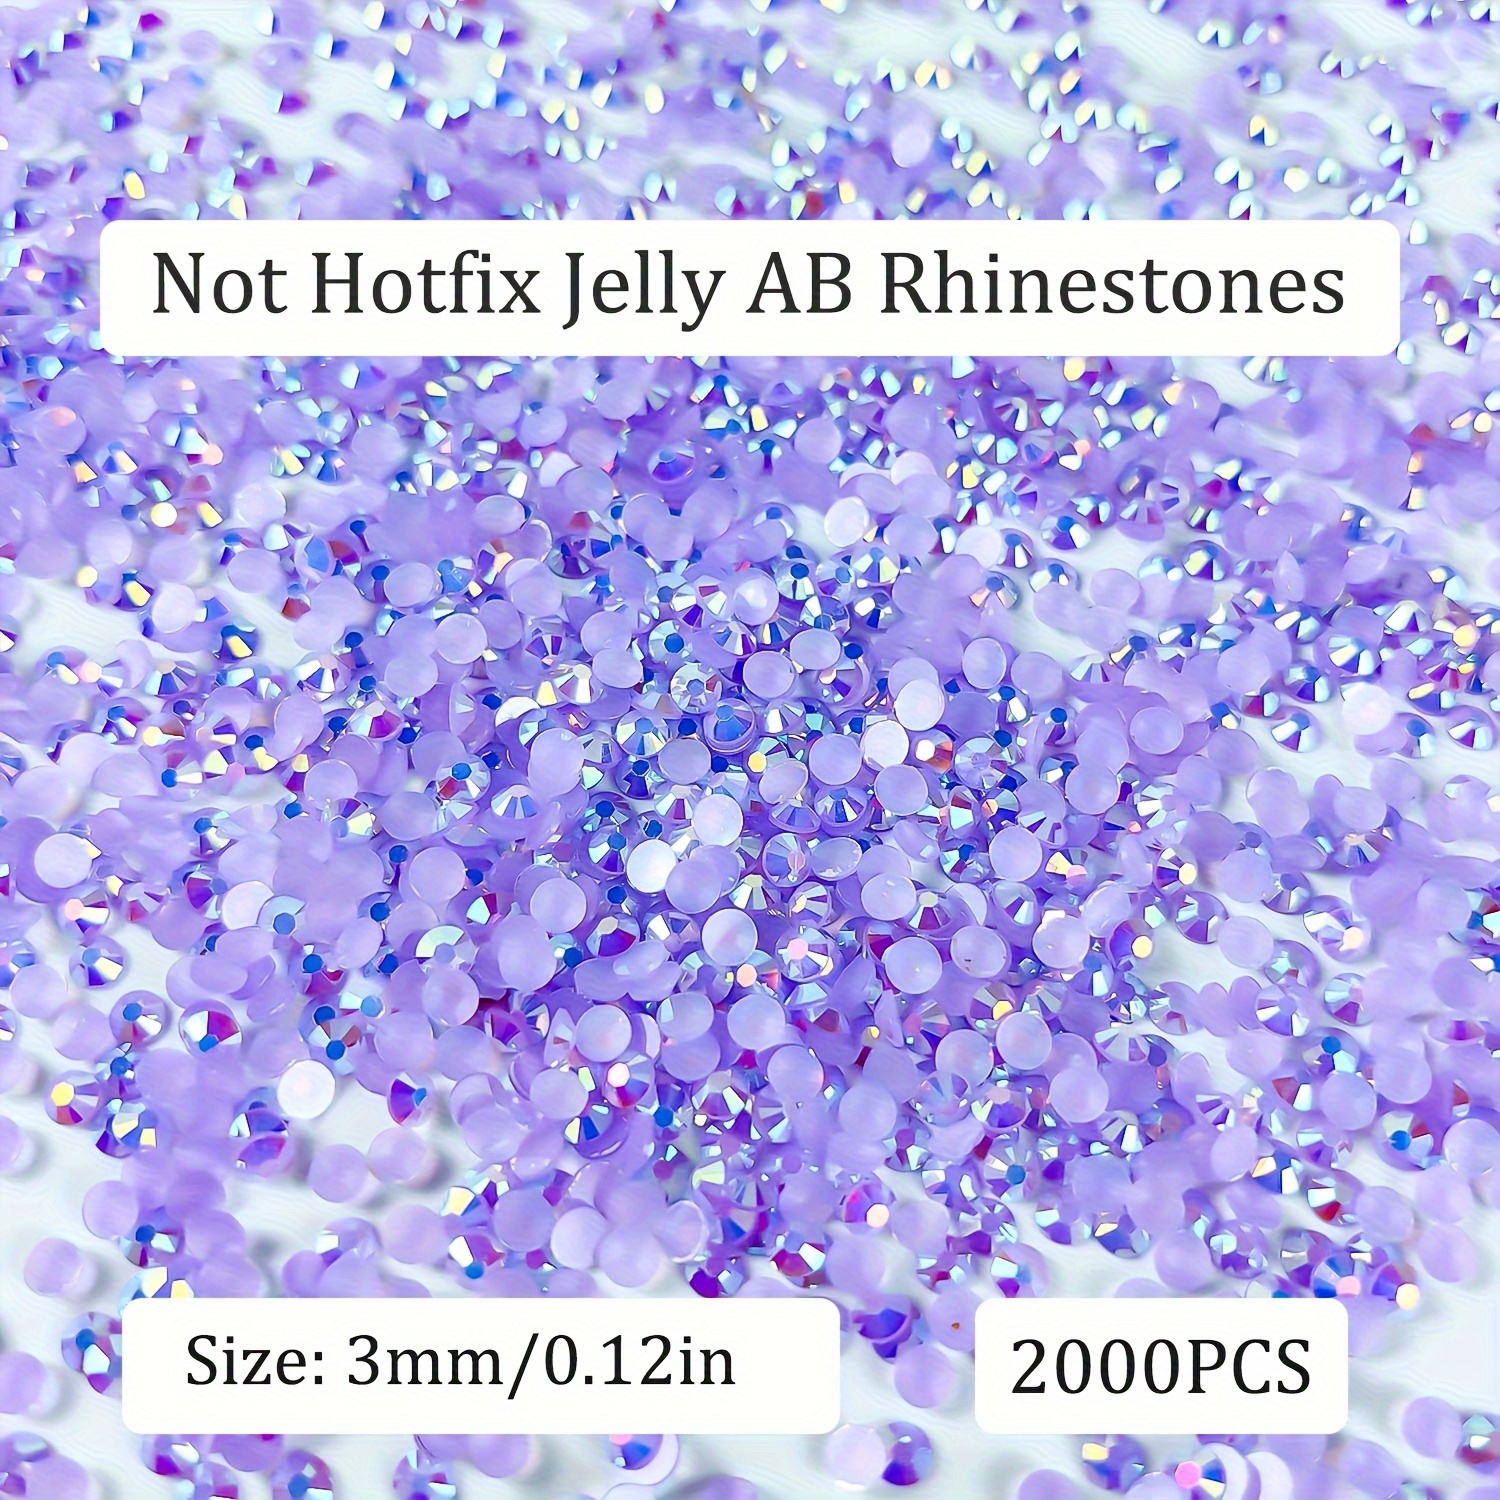  11000Pcs Purple Rhinestones Flatback with b7000 Glue for Crafts  Clothes Clothing Crafting, Dark Purple Flat Back Gems for Shirt Shoes  Sneakers, Violet Deep Purple Diamond Crystals Kit 2-5mm Mix Sizes